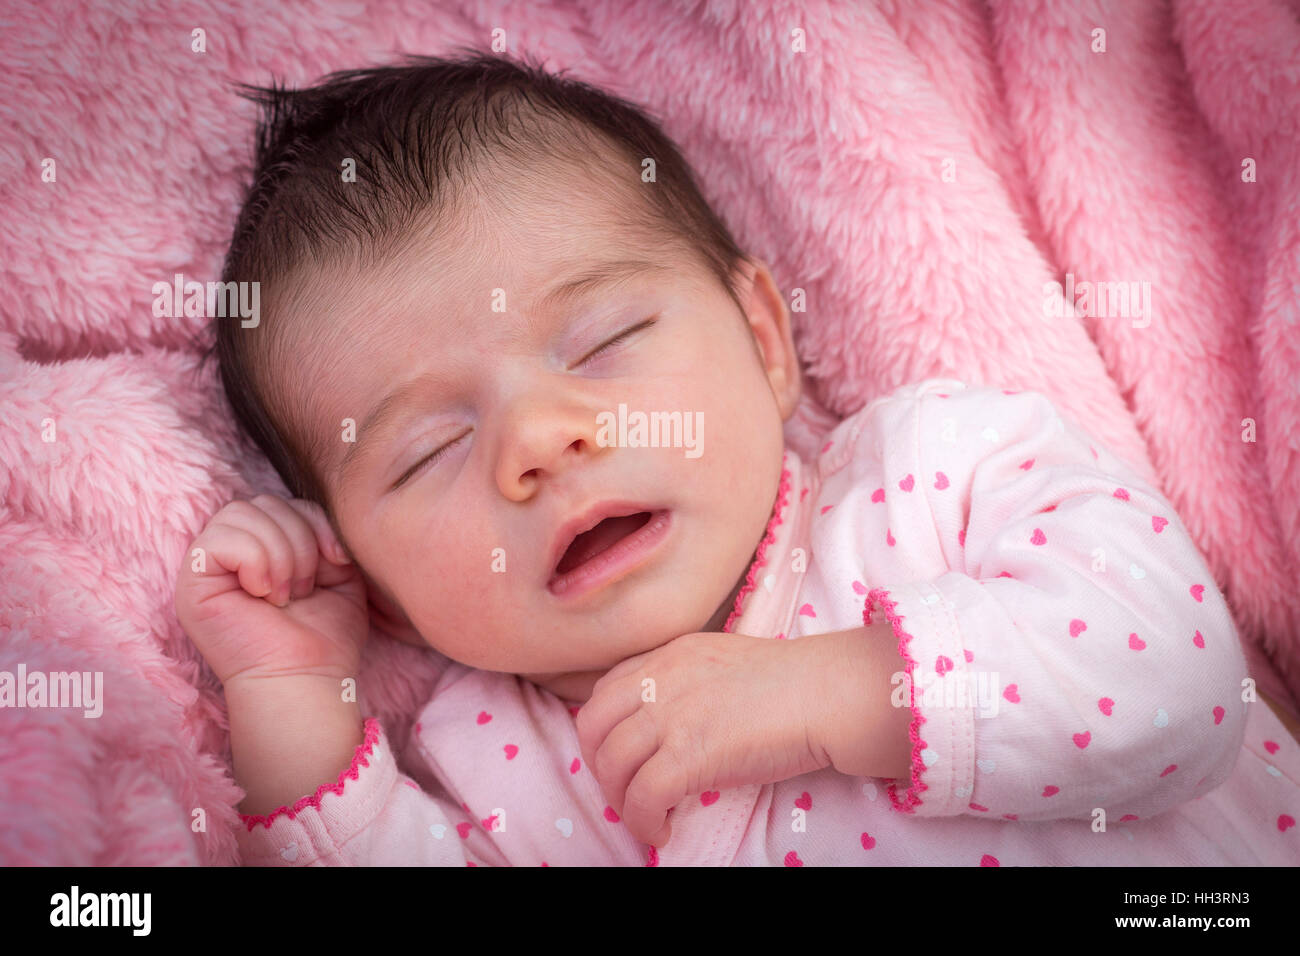 A less than three weeks of age cute baby girl, sleeping with mouth open on a pink blanket. Nouveau-né dormant bouche ouverte. Stock Photo